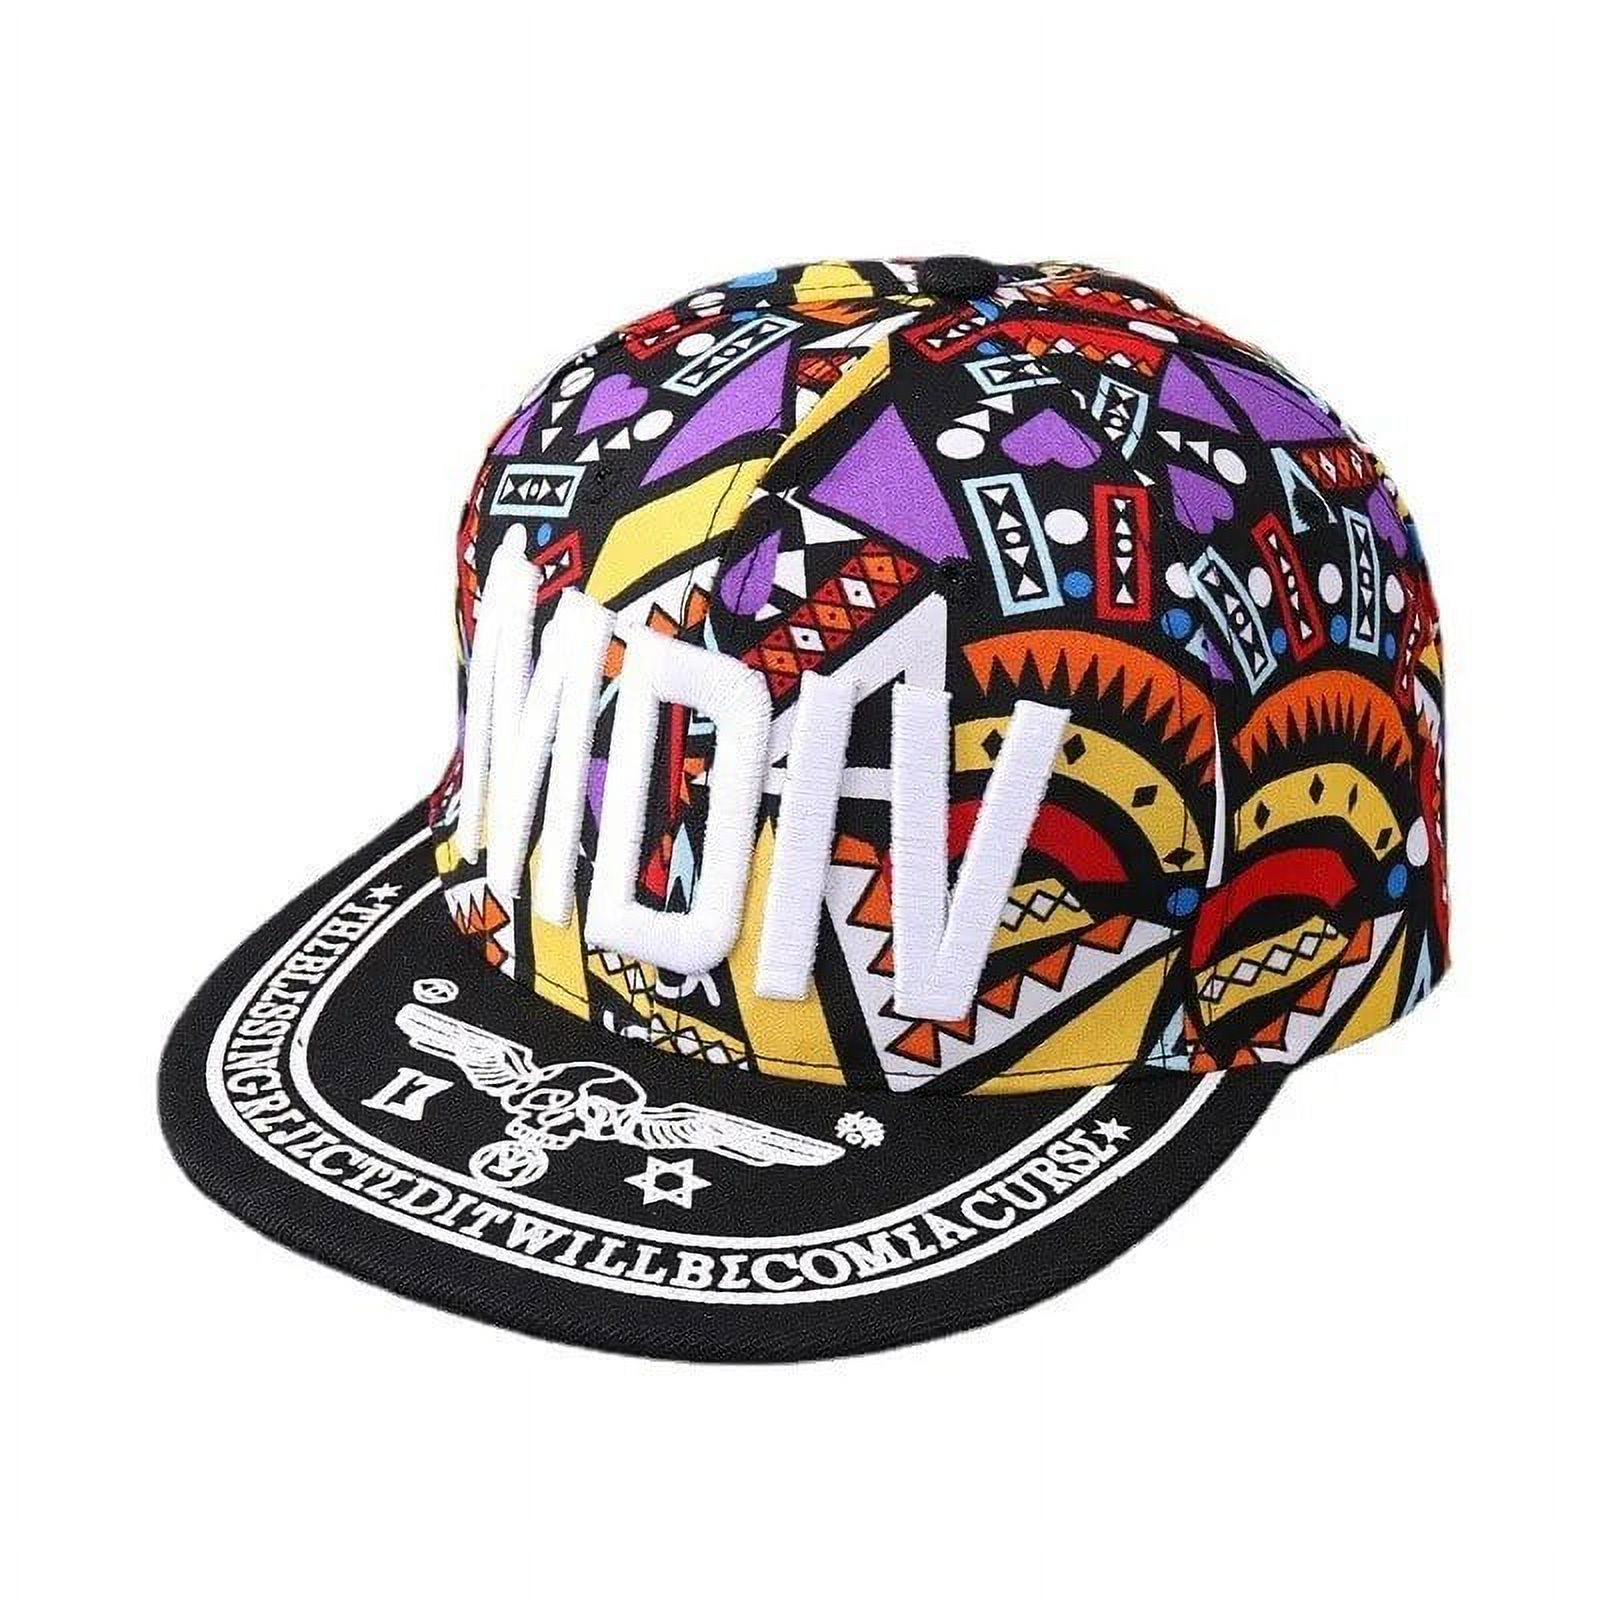 Hip hop baseball cap male and female couples personality trend Hip Hop ...